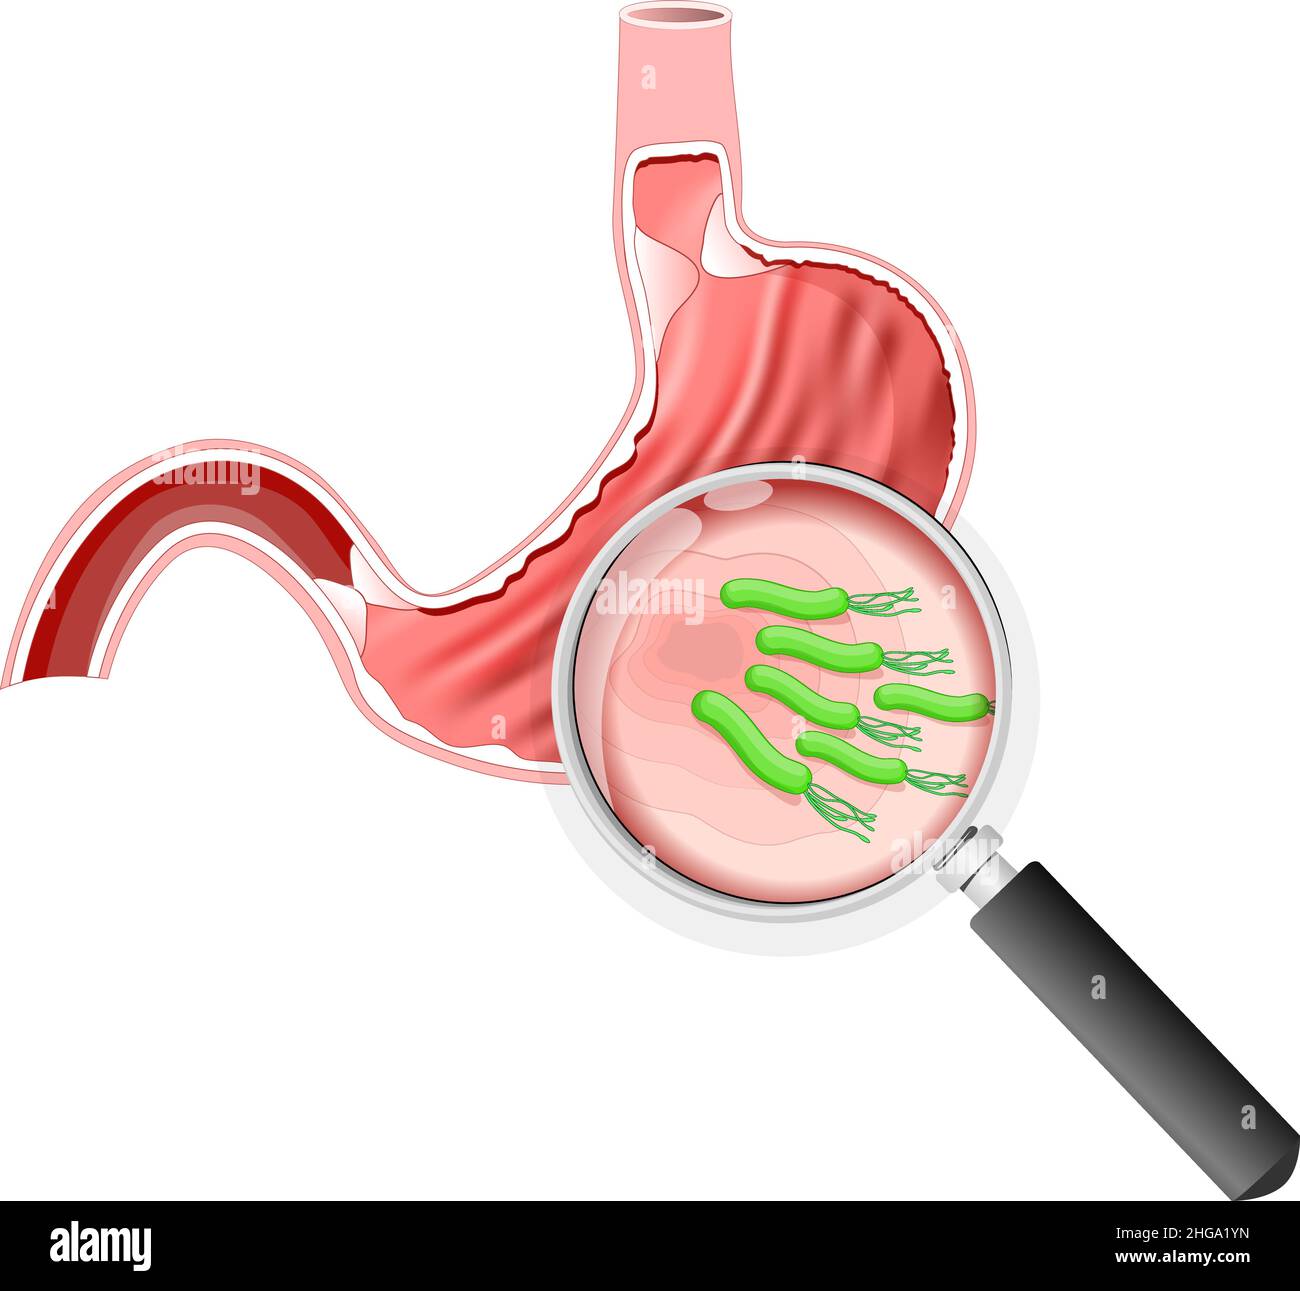 Helicobacter pylori bacteria. stomach with Peptic ulcer disease, and Magnifying glass. Vector illustration Stock Vector